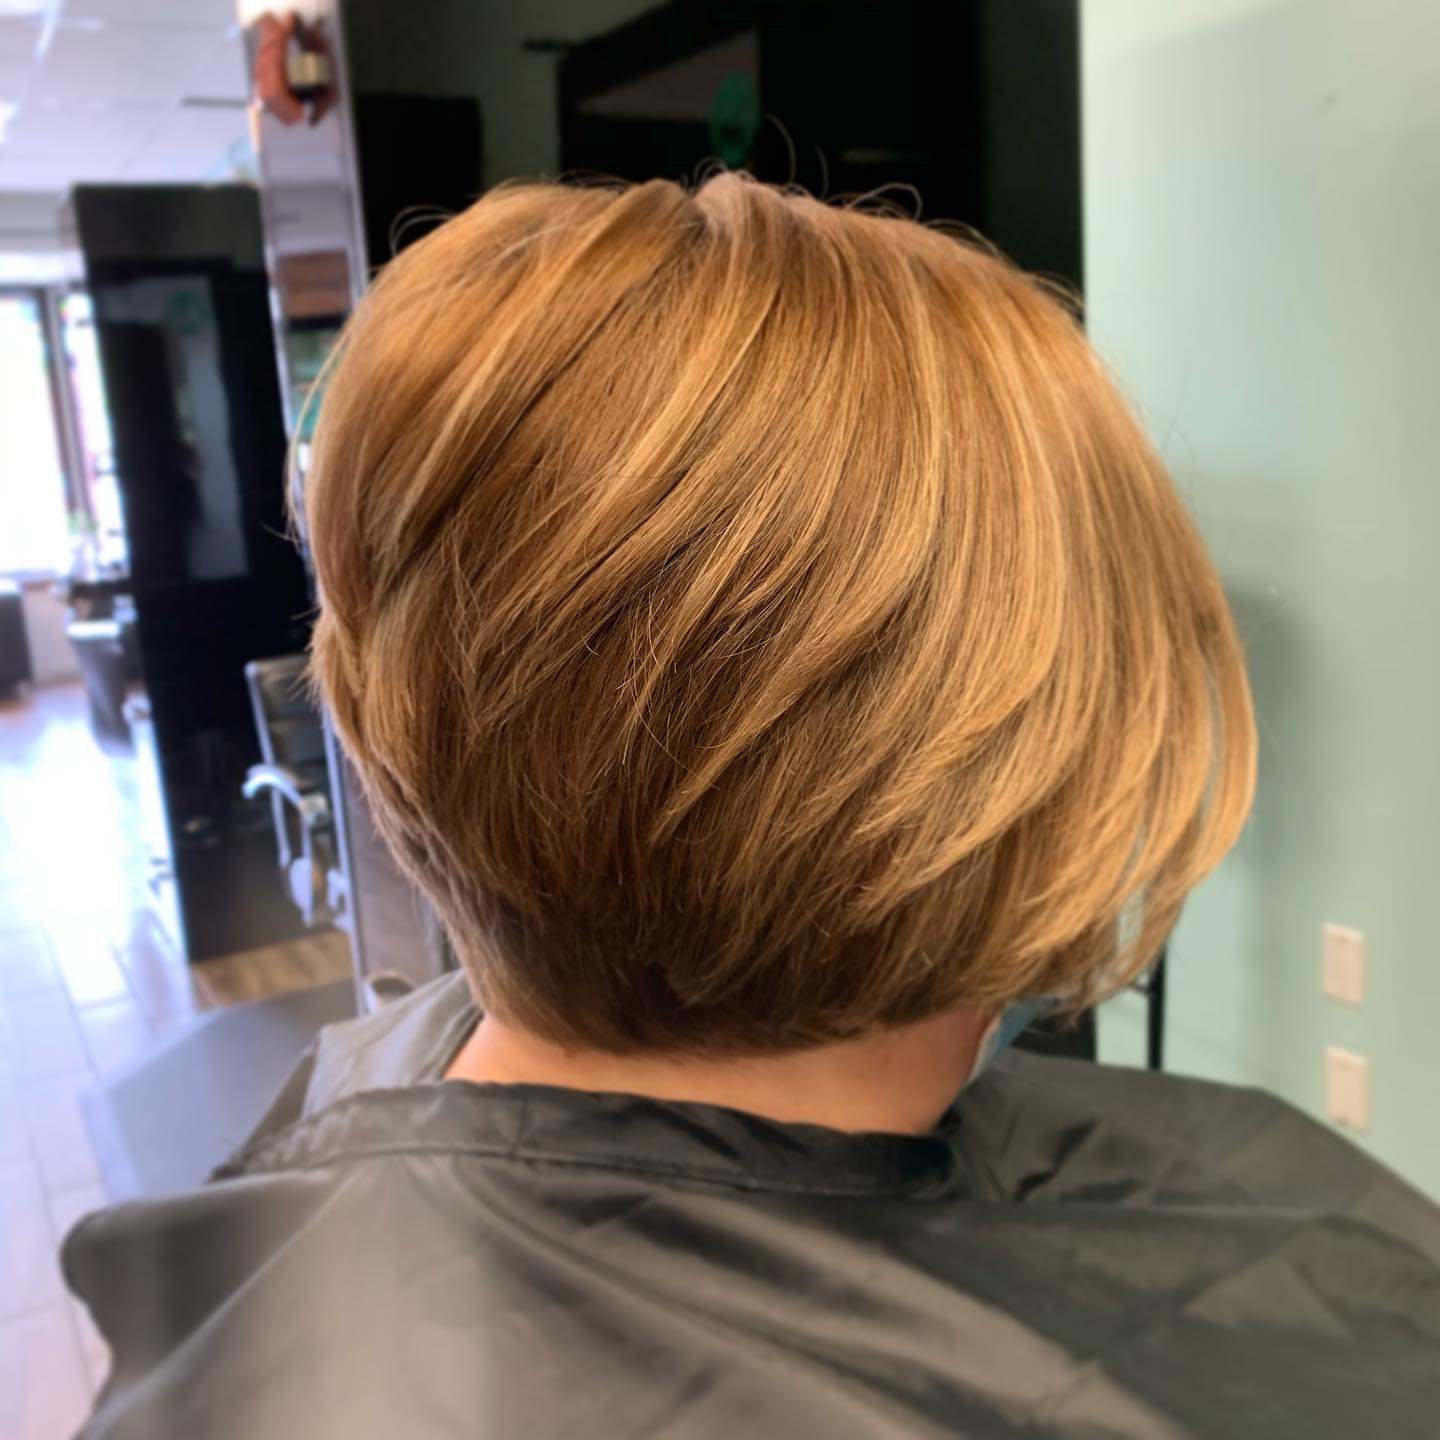 Stacked Bob 6 Long stacked bob | Medium length stacked bob | Pictures of stacked bob haircuts front and back Stacked Bob Hairstyles for Women